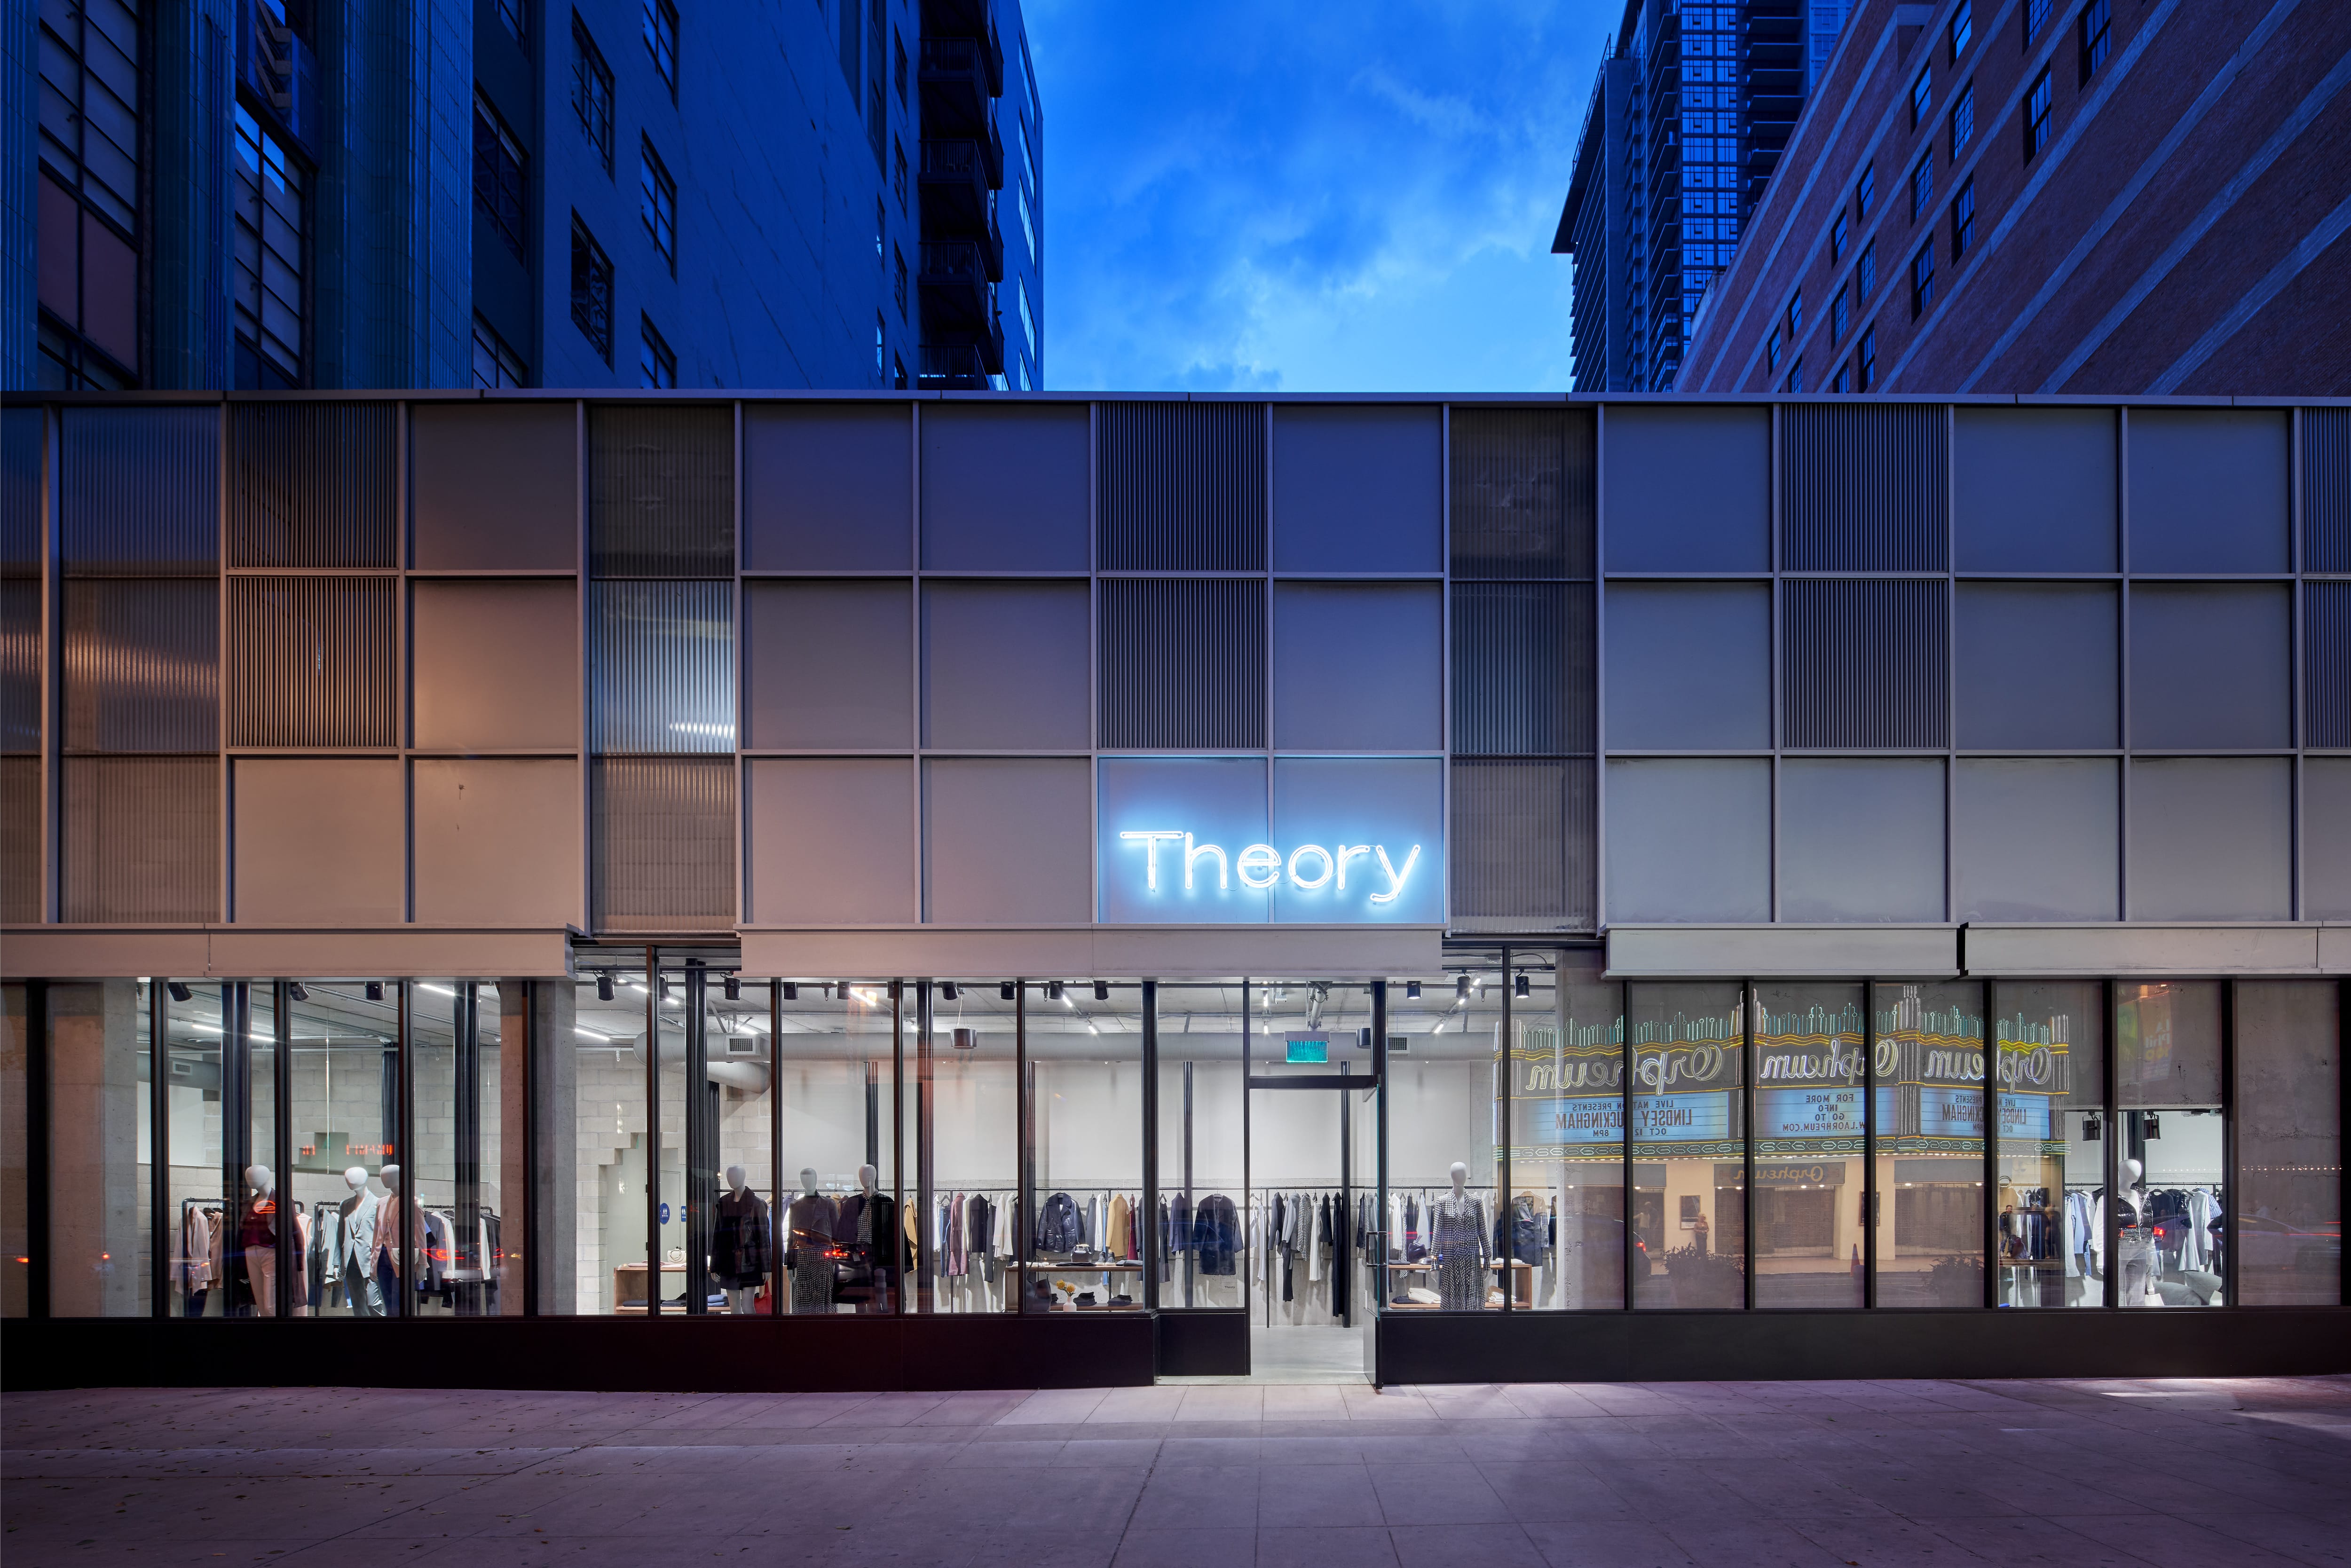 theory outlet